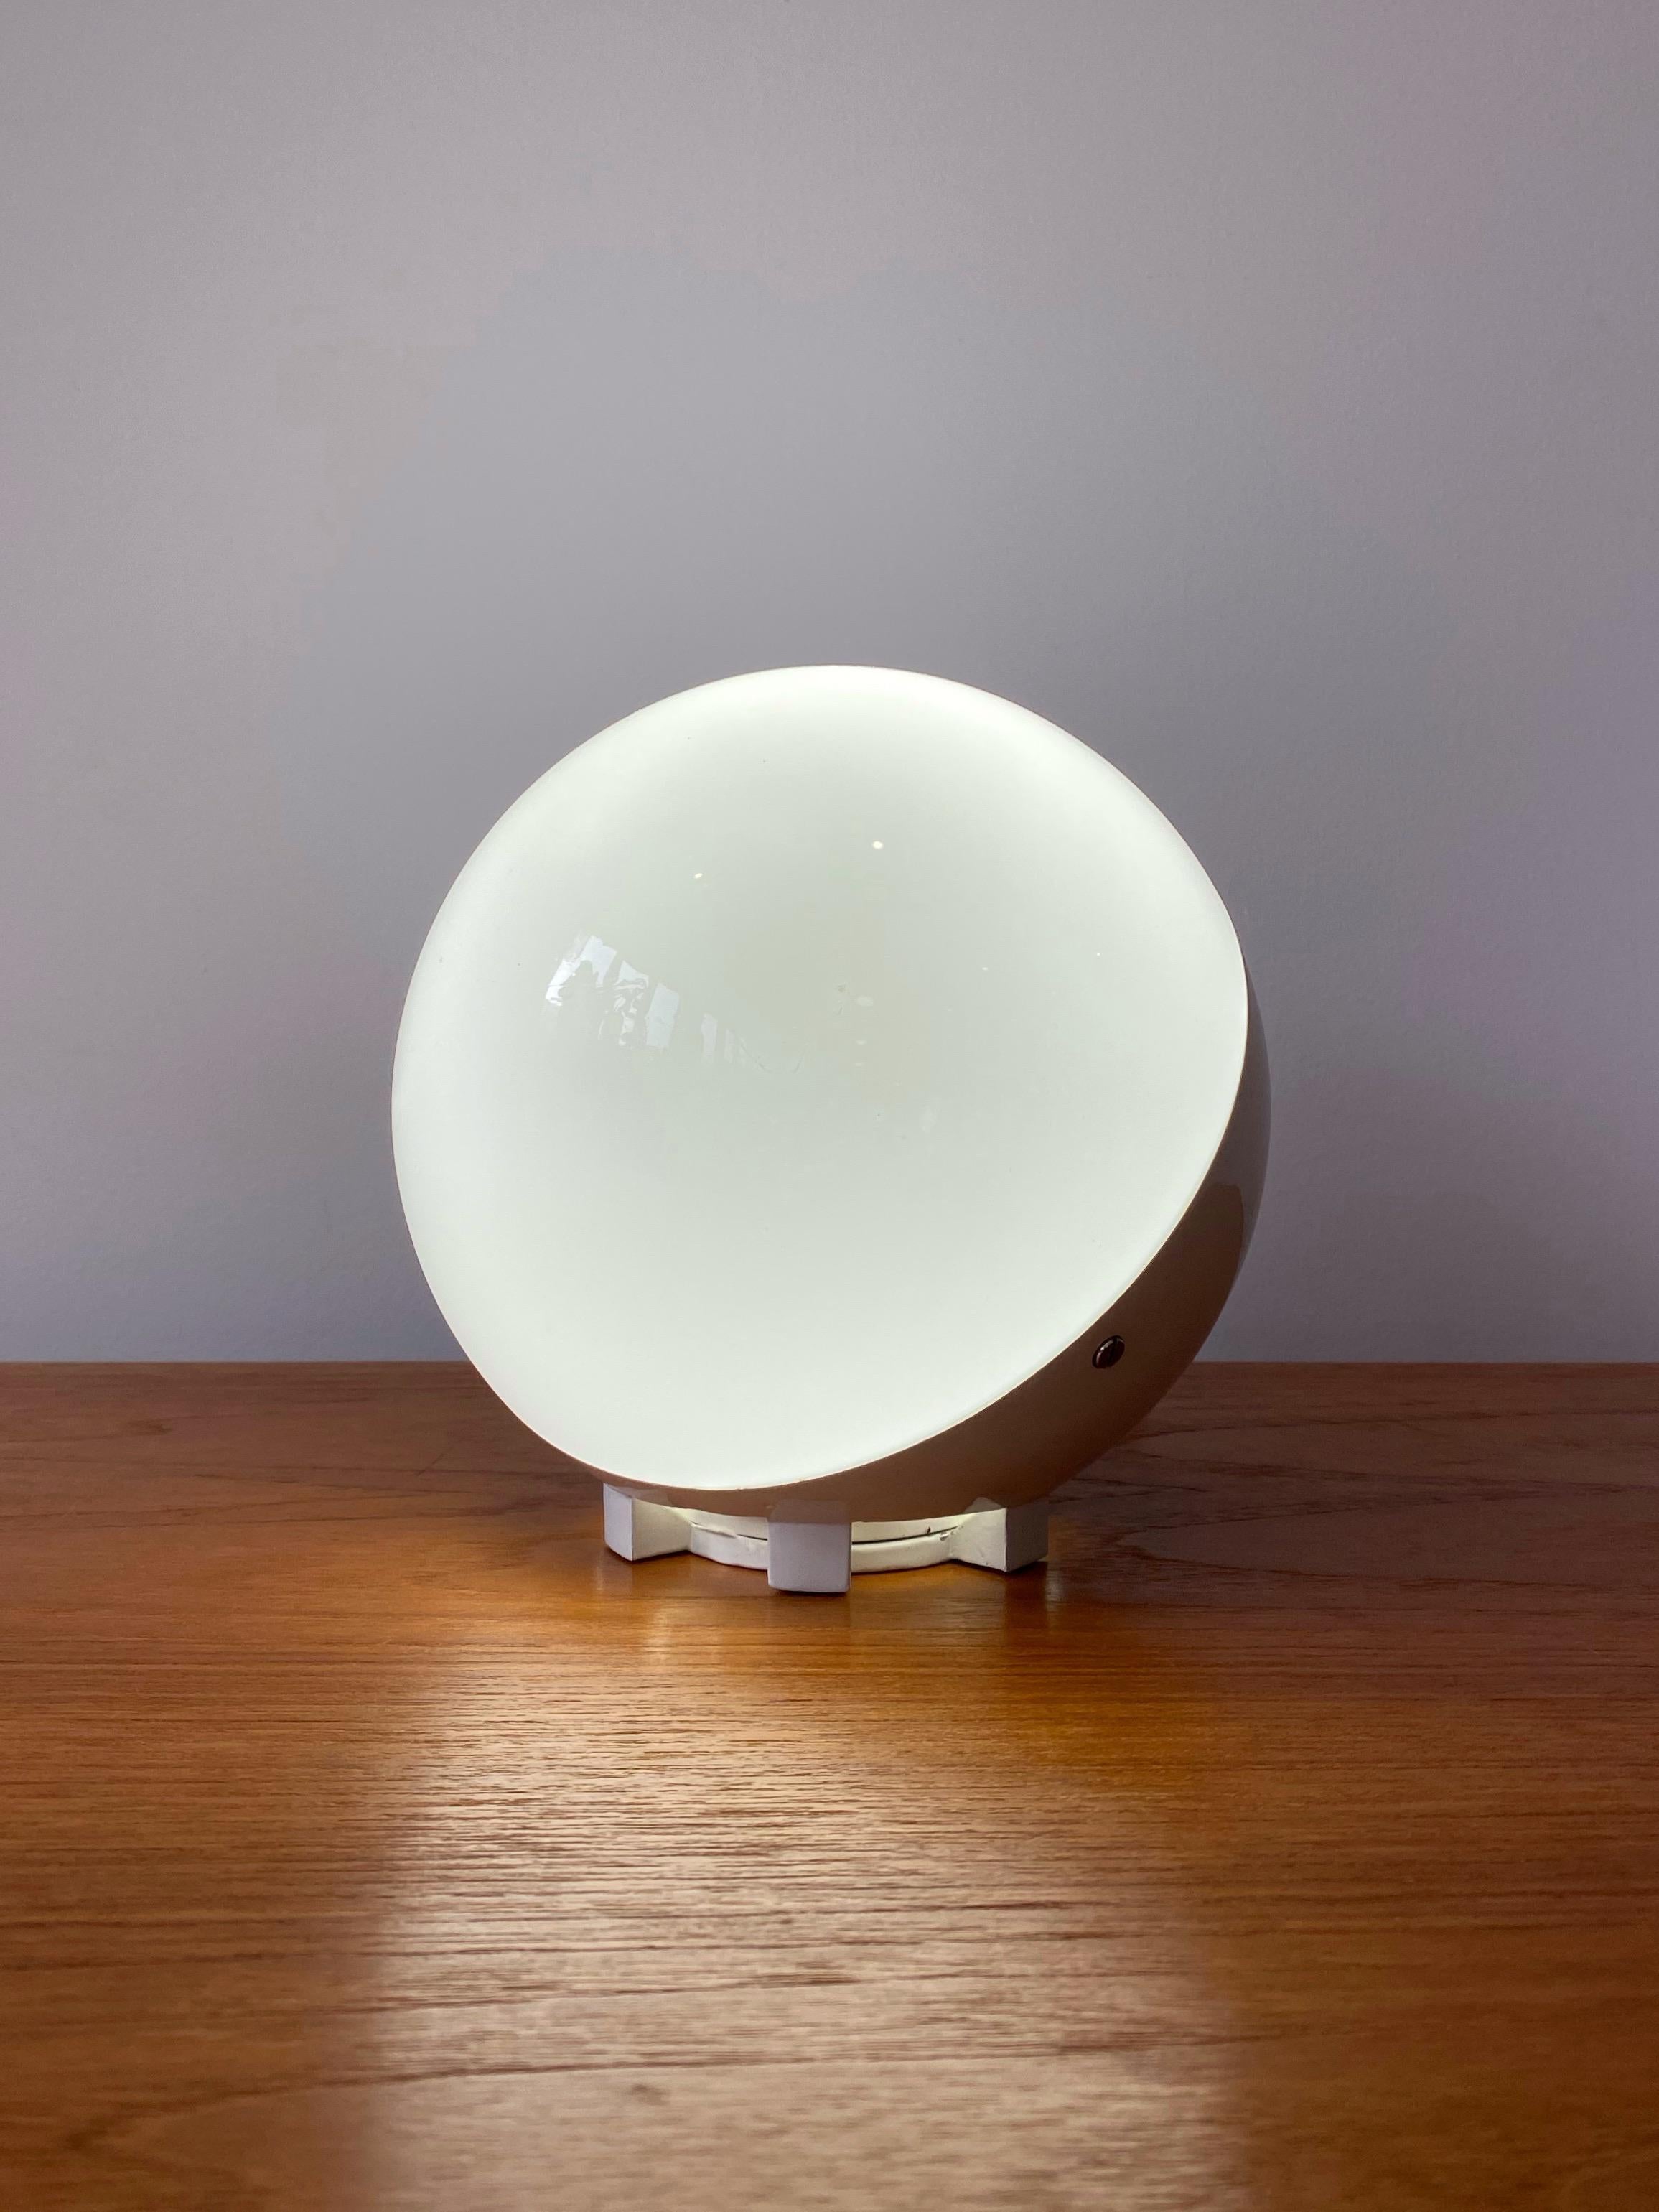 Mid-Century Modern small scale globe lamp. Glass shade sets into white powder coated metal frame. Original “Made in Spain” tags attached.